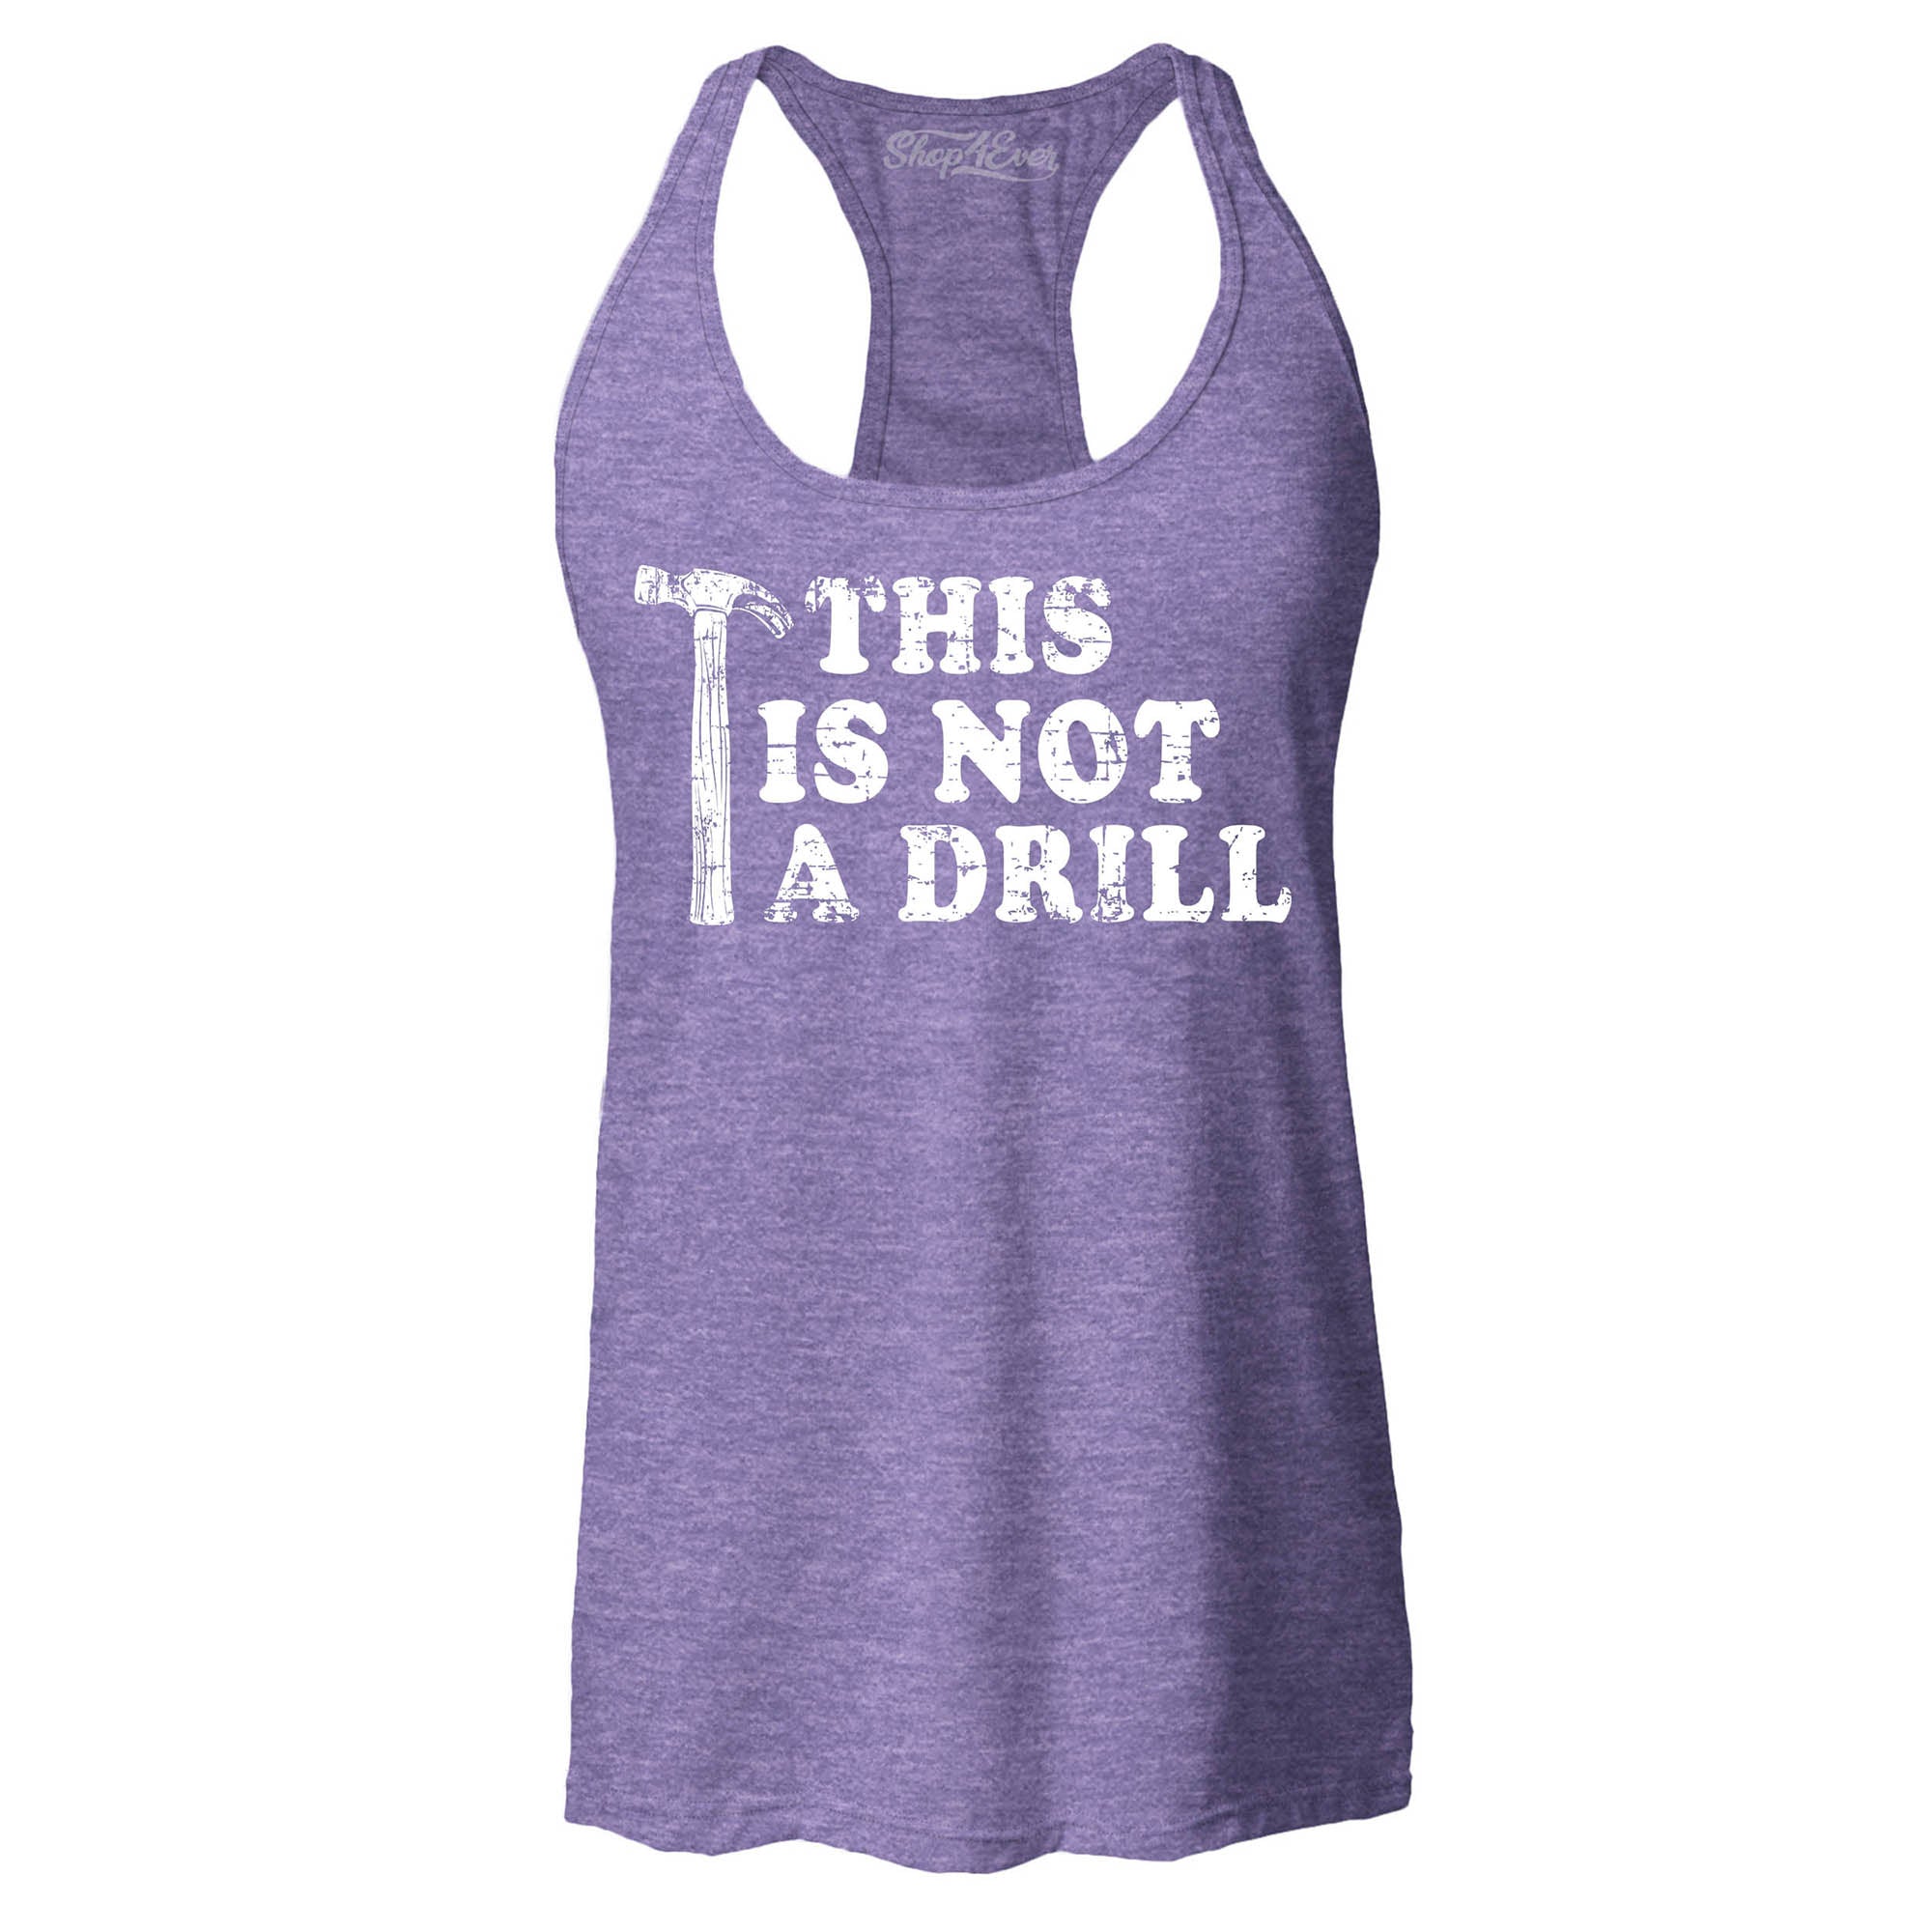 This is Not a Drill Women's Racerback Tank Top Slim Fit